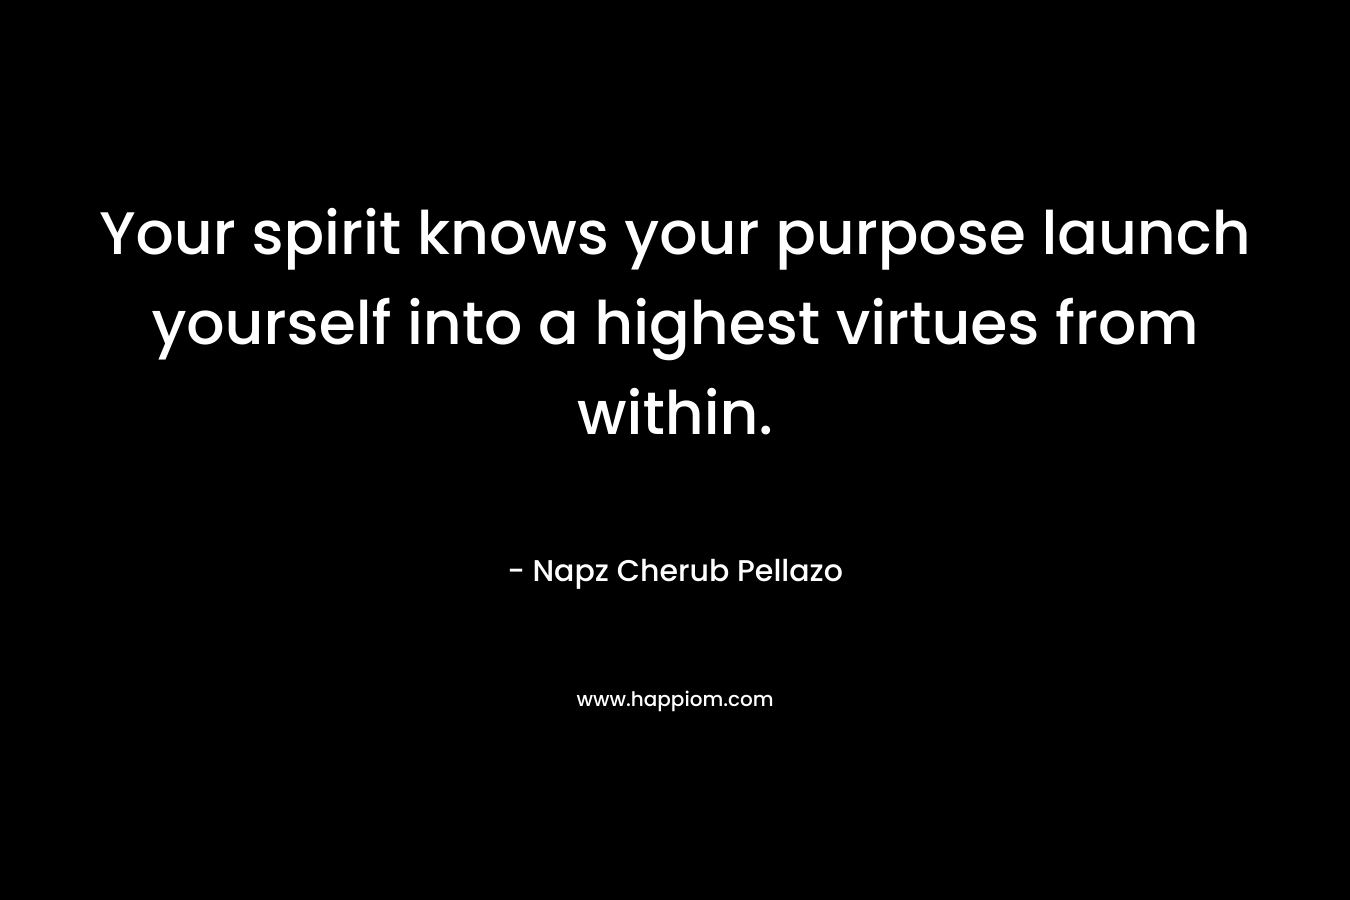 Your spirit knows your purpose launch yourself into a highest virtues from within.